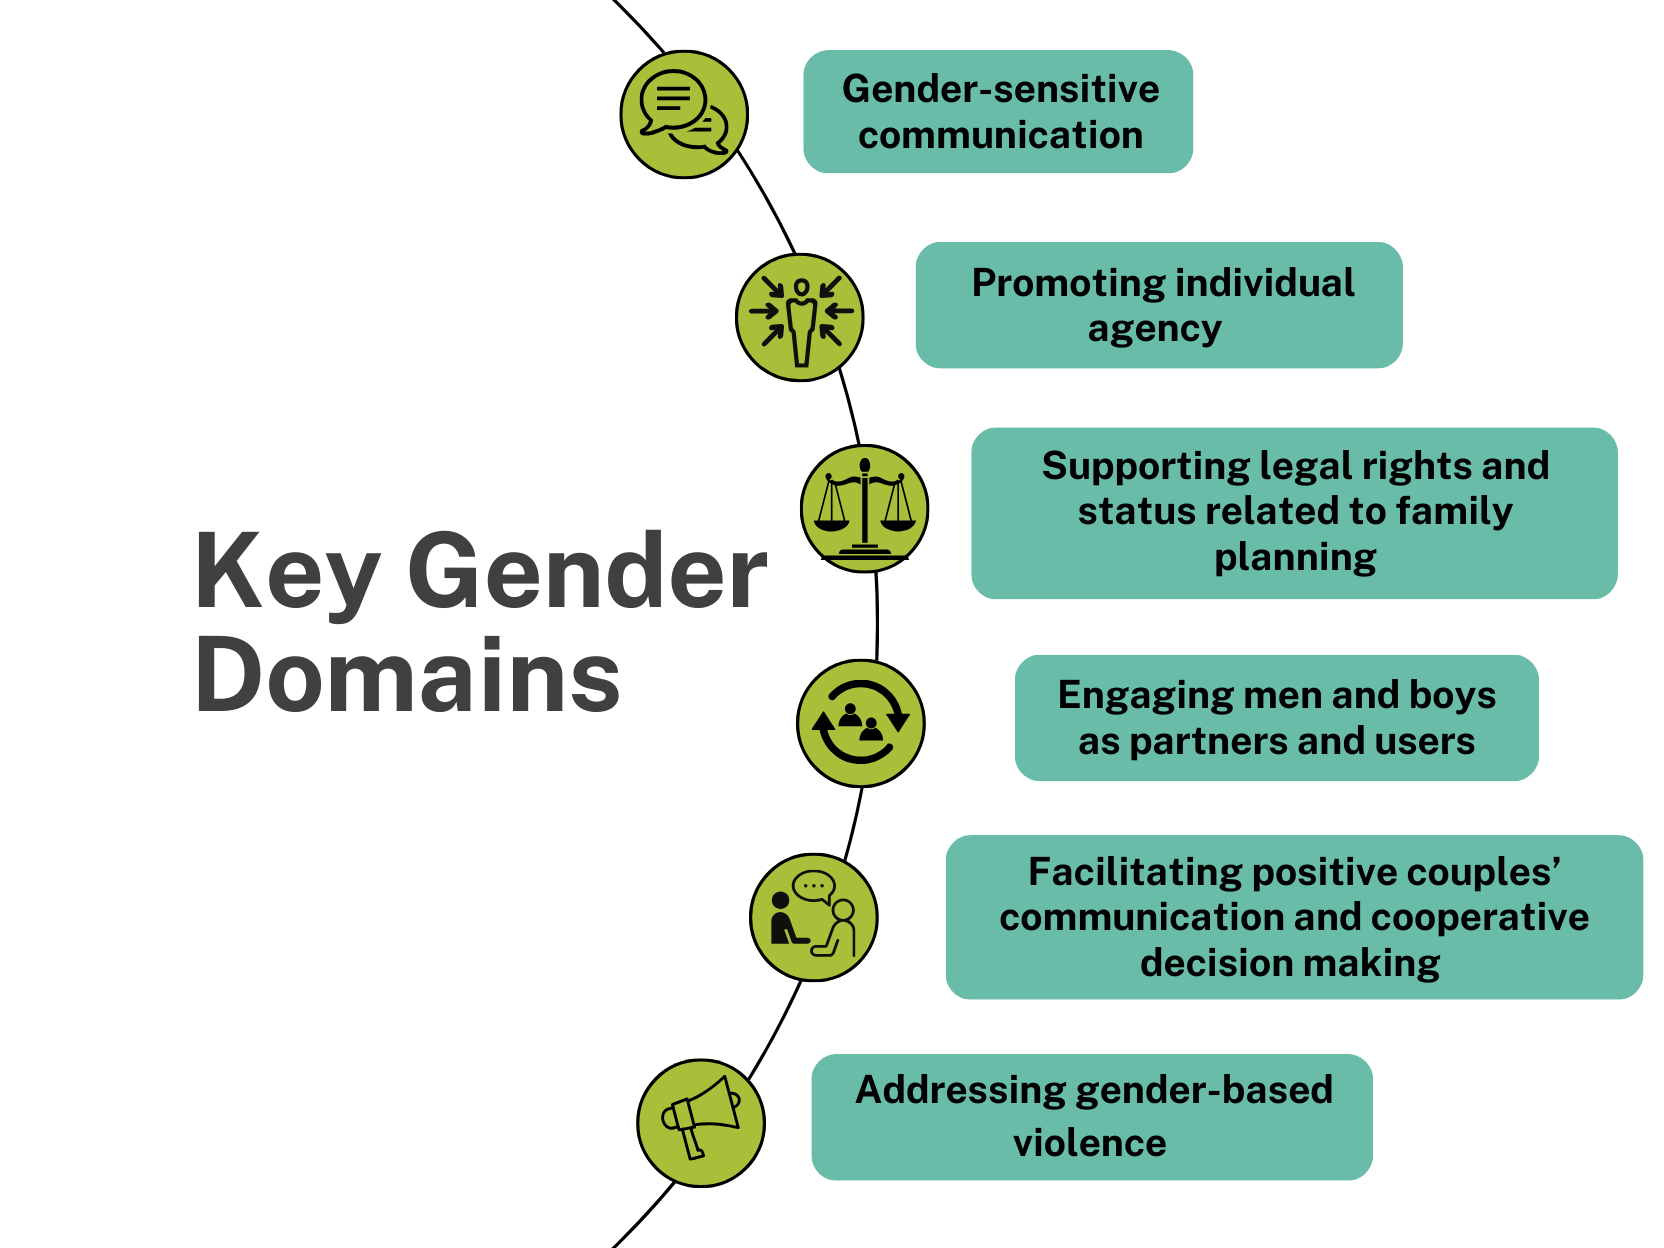 Key Gender Domains: Gender-sensitive communication, Promoting individual agency, Supporting legal rights and status related to family planning, Engaging men and boys as partners and users, Facilitating positive couples' communication and cooperative decision making, Addressing gender-based violence